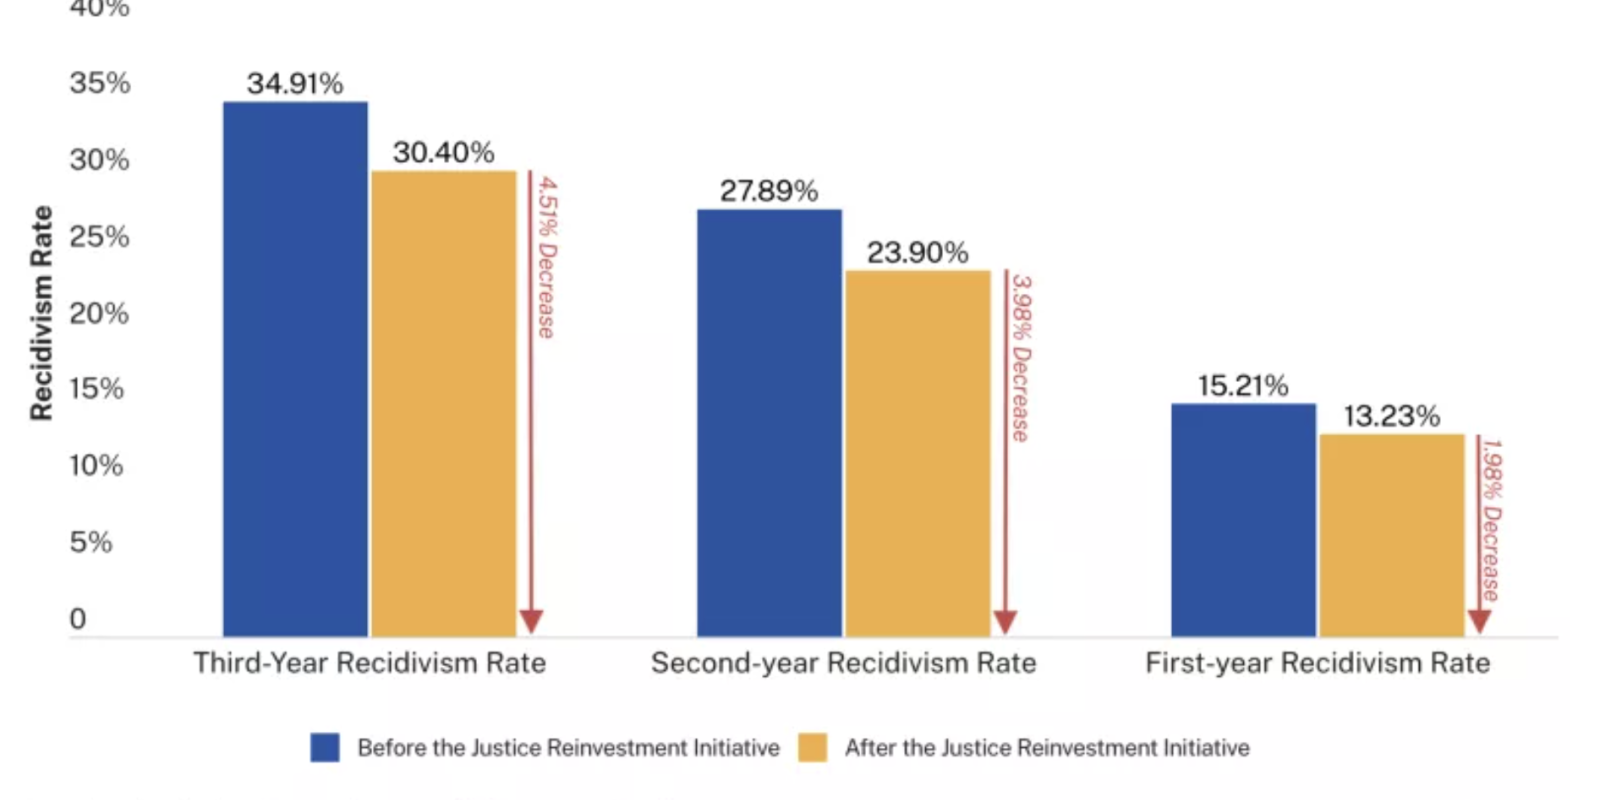 Third, Second, and First-year Recidivism Rates in Louisiana Prisons